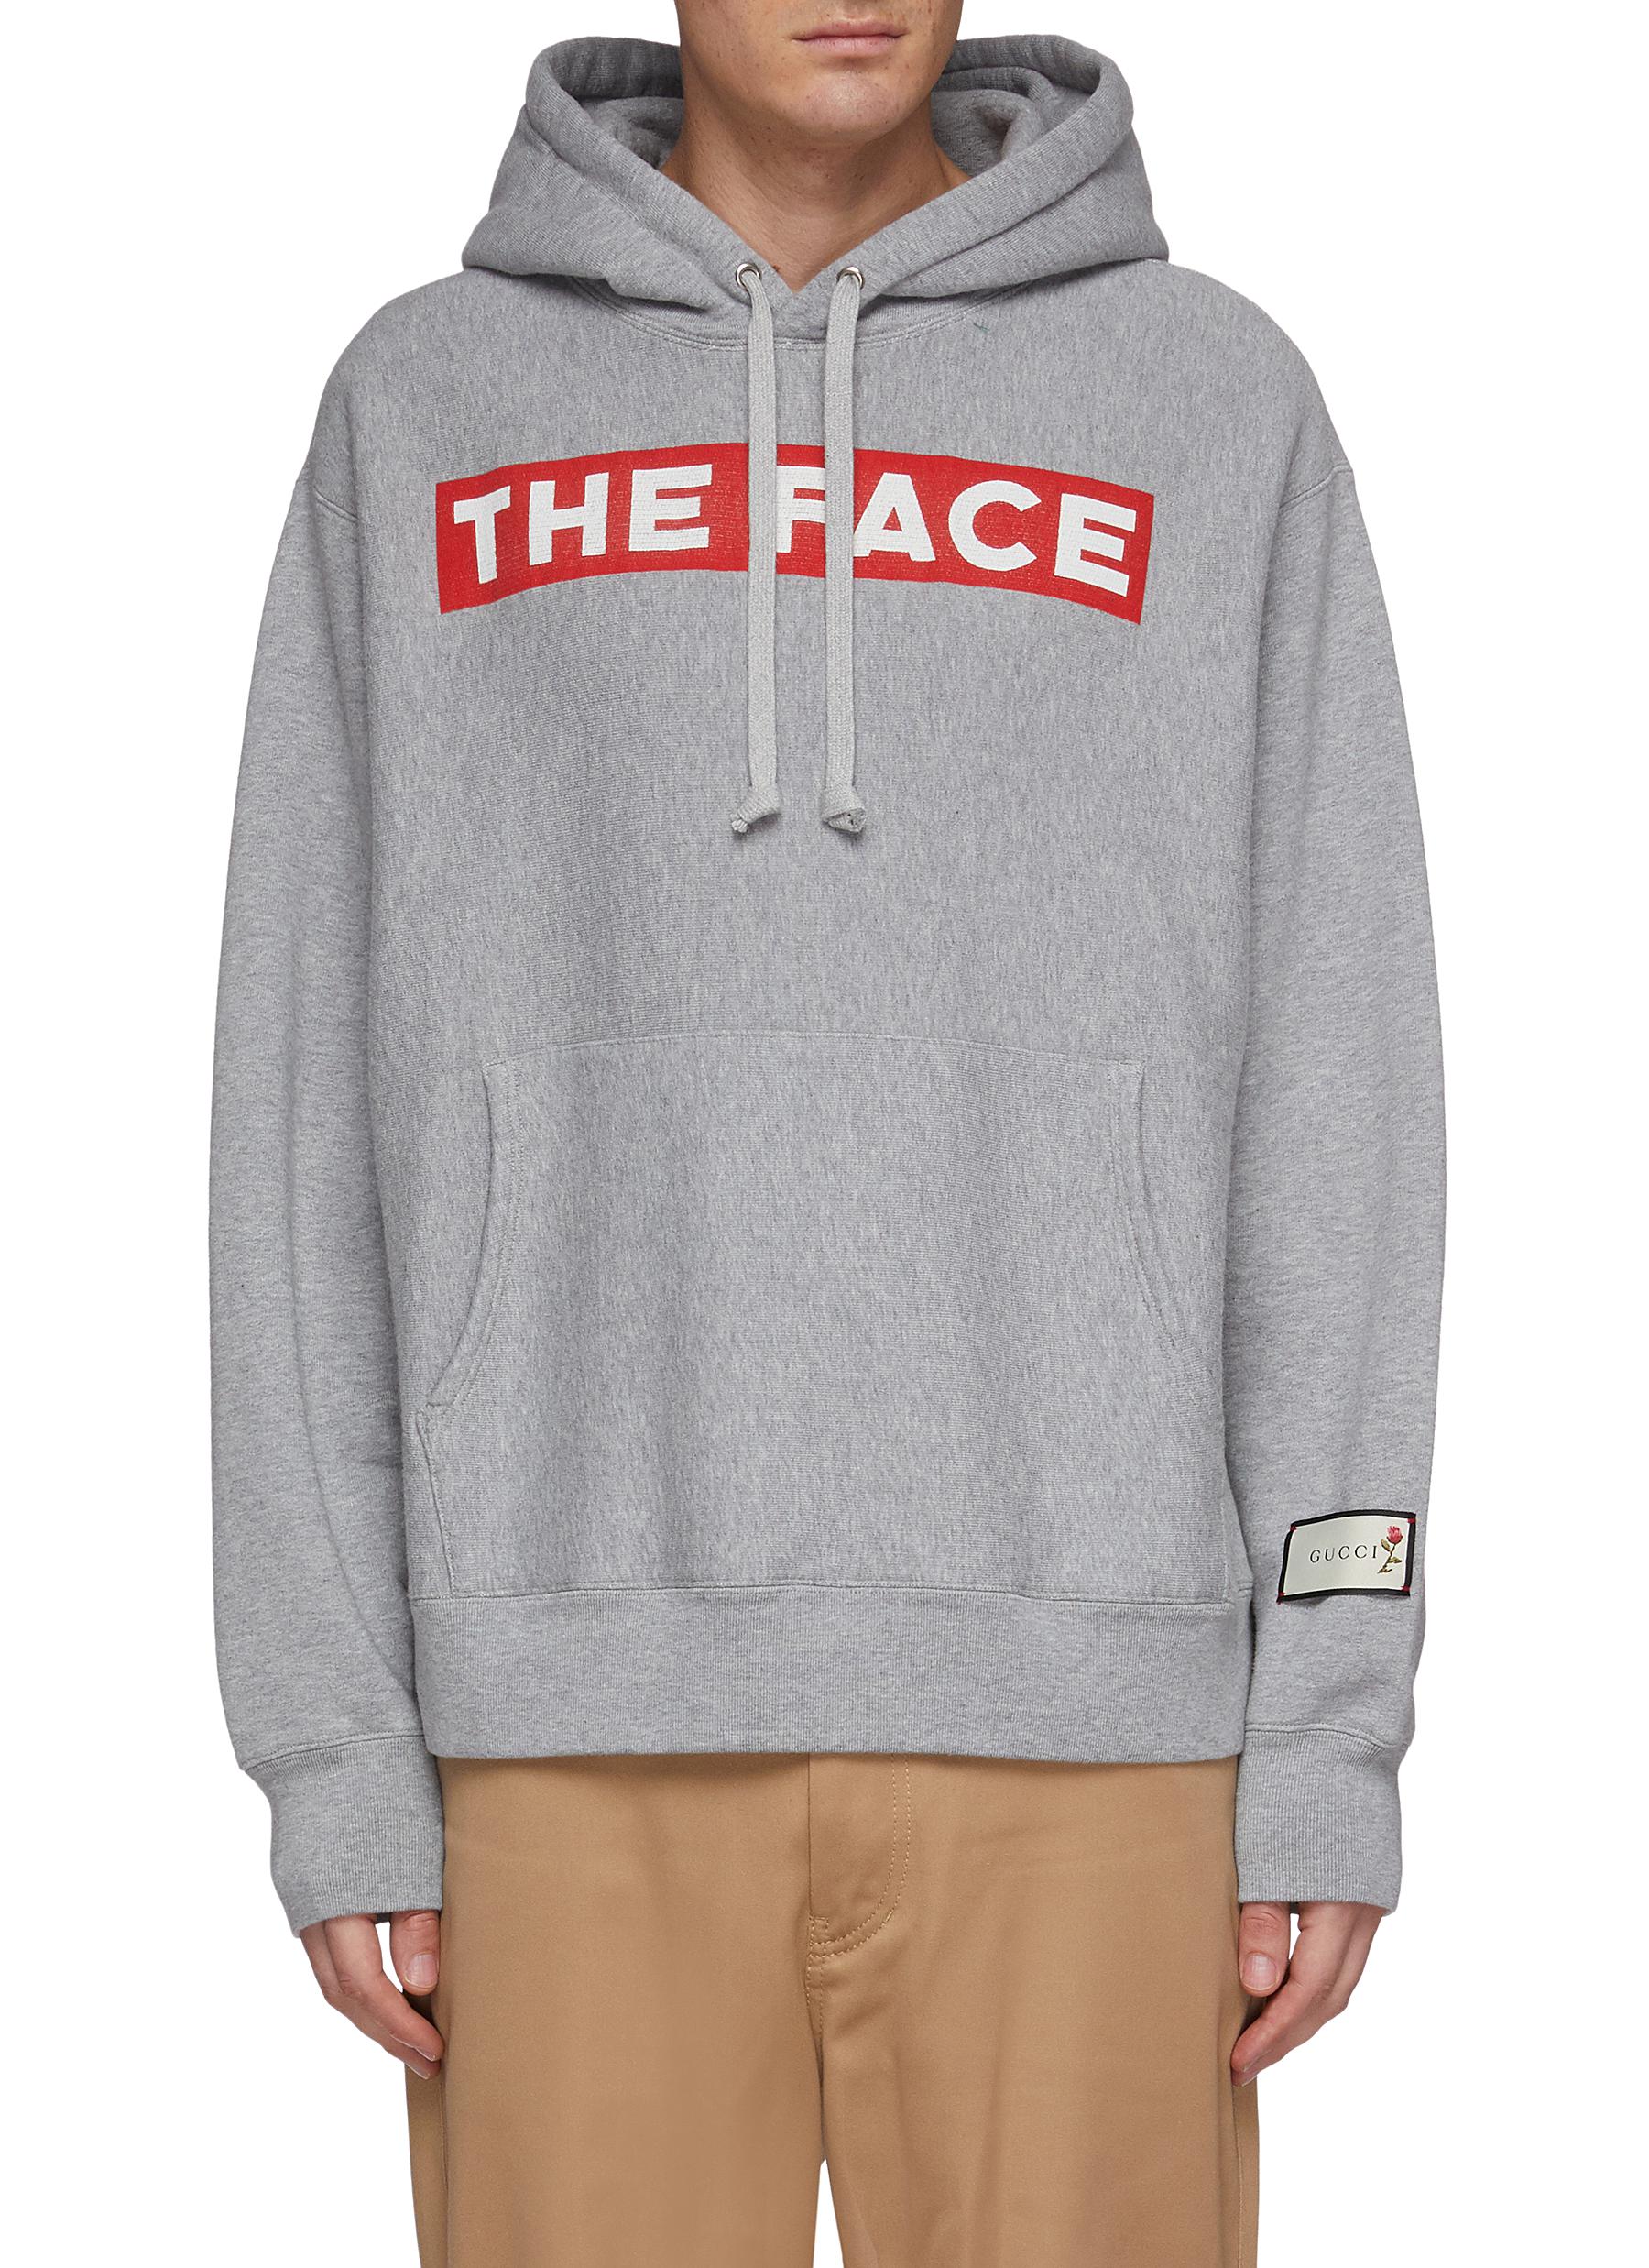 GUCCI | 'The Face' print knit hoodie 